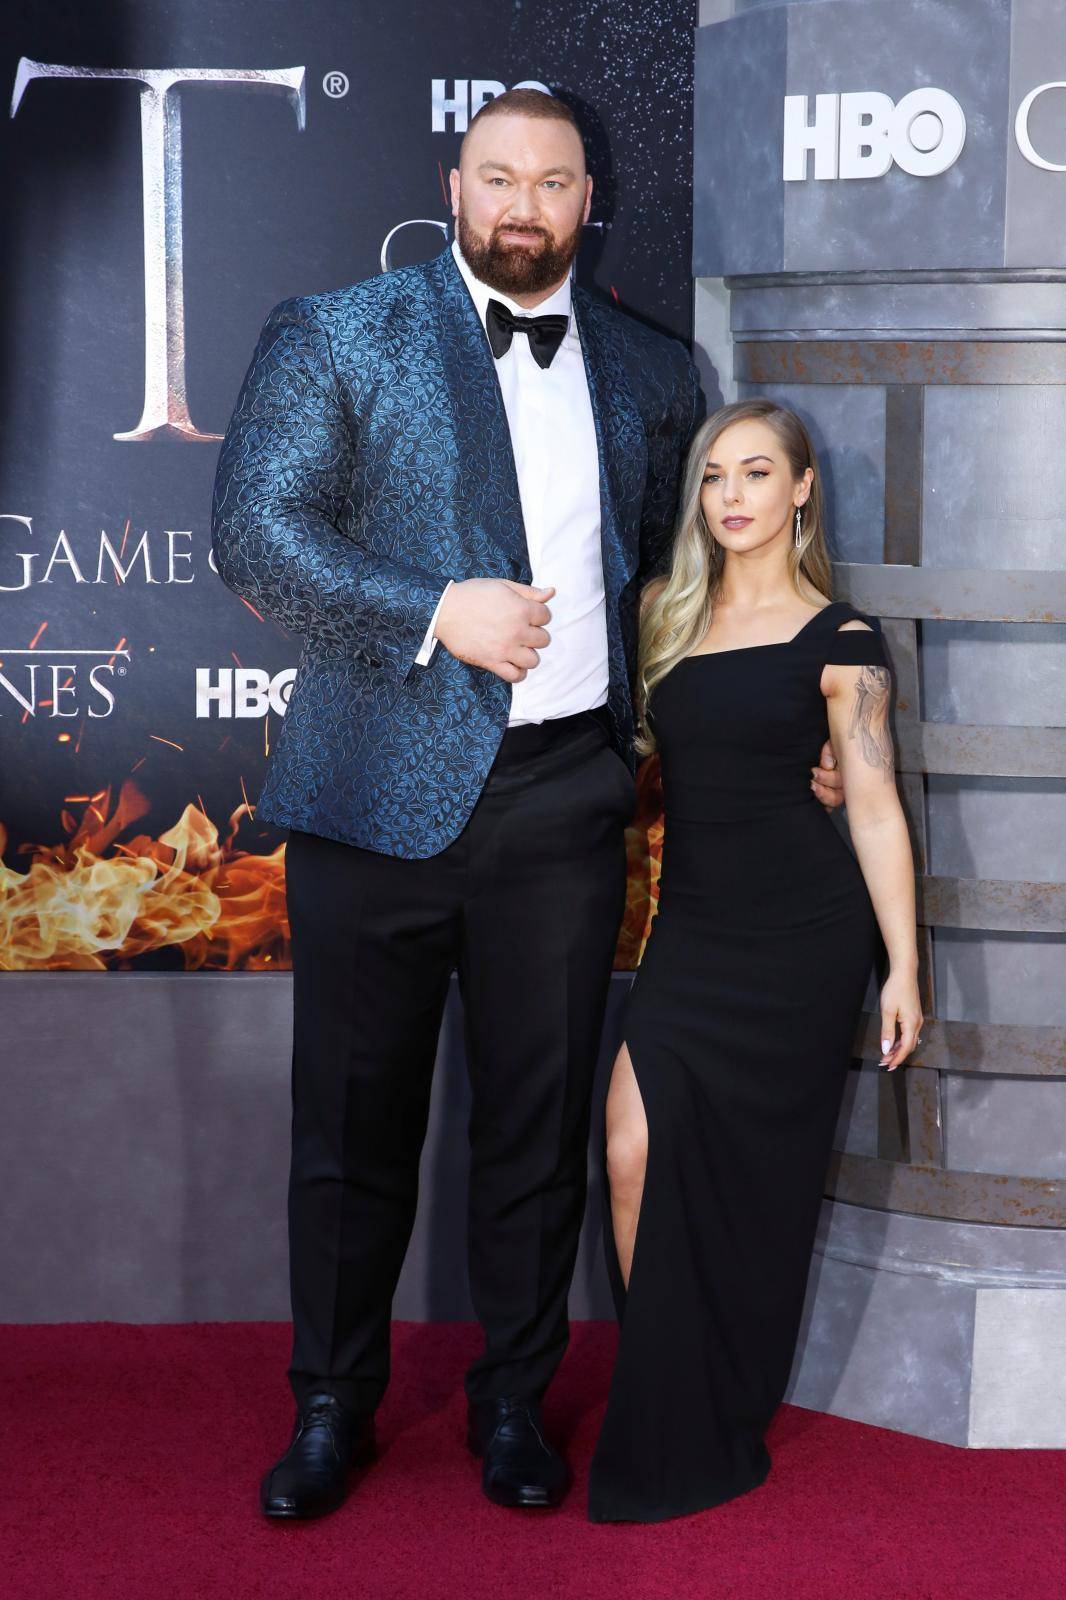 Hafthor Julius Bjornsson and Kelsey Henson arrive for the premiere of the final season of "Game of Thrones" at Radio City Music Hall in New York